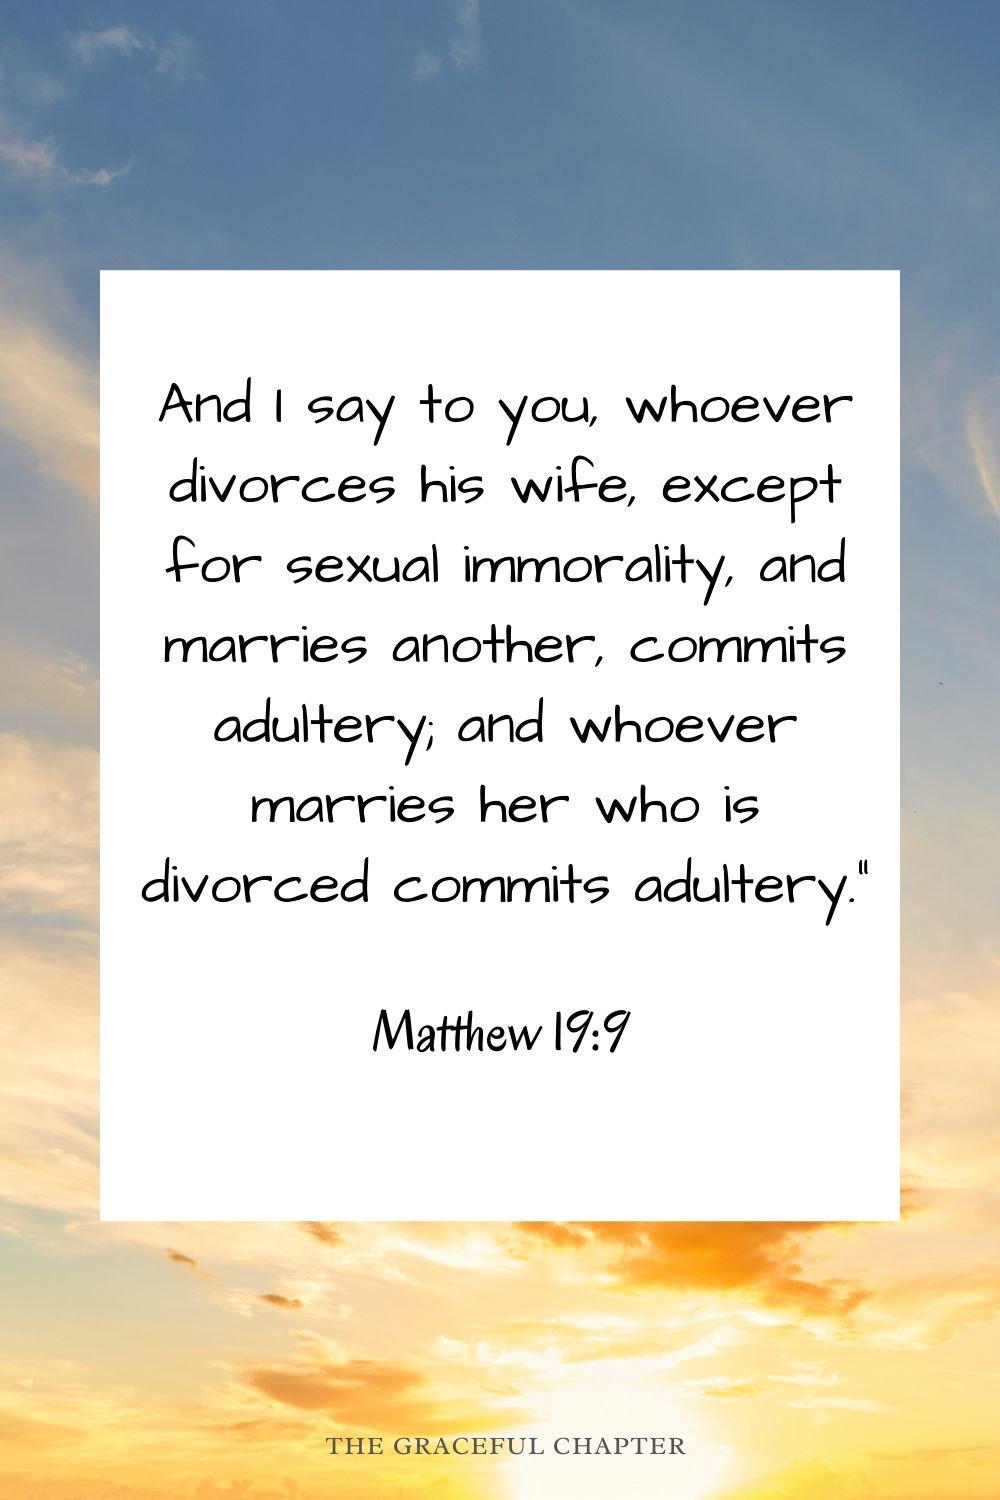 And I say to you, whoever divorces his wife, except for sexual immorality, and marries another, commits adultery; and whoever marries her who is divorced commits adultery.” Matthew 19:9